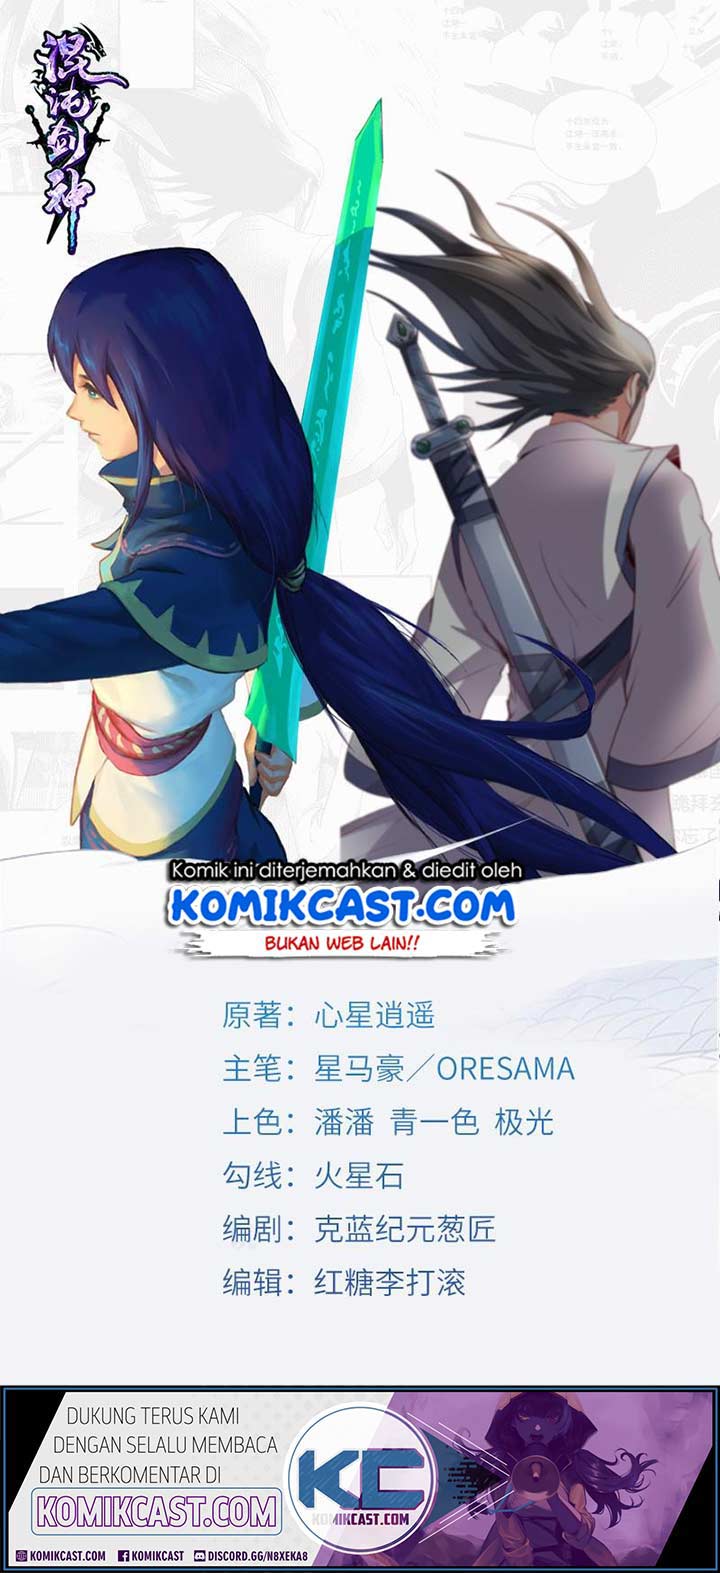 Chaotic Sword God Chapter 166